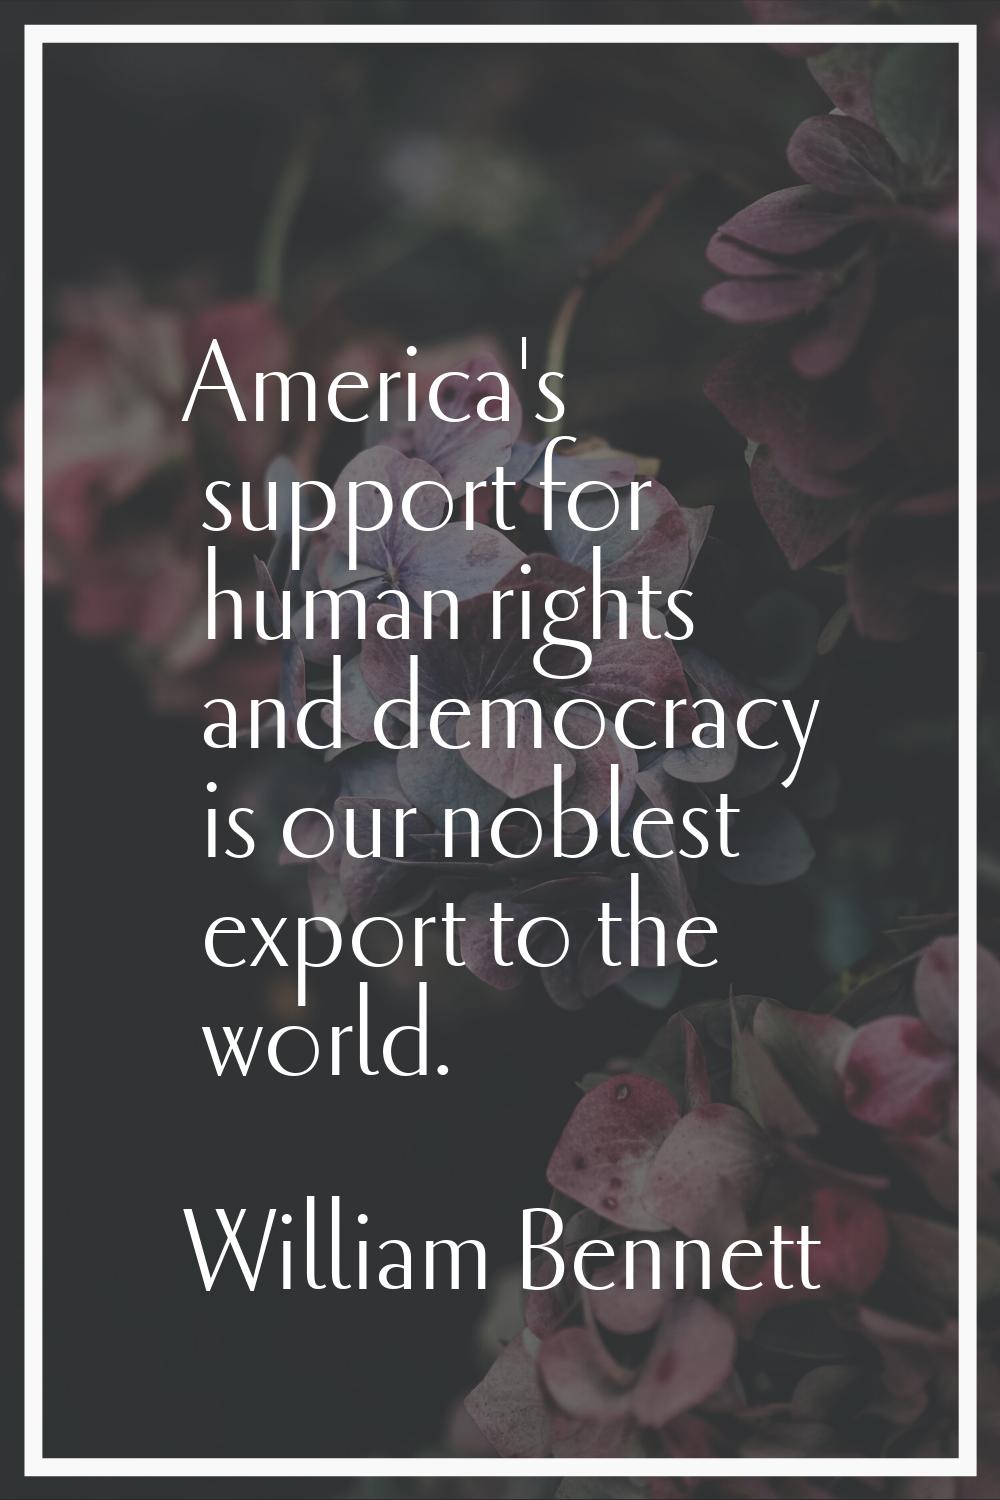 America's support for human rights and democracy is our noblest export to the world.